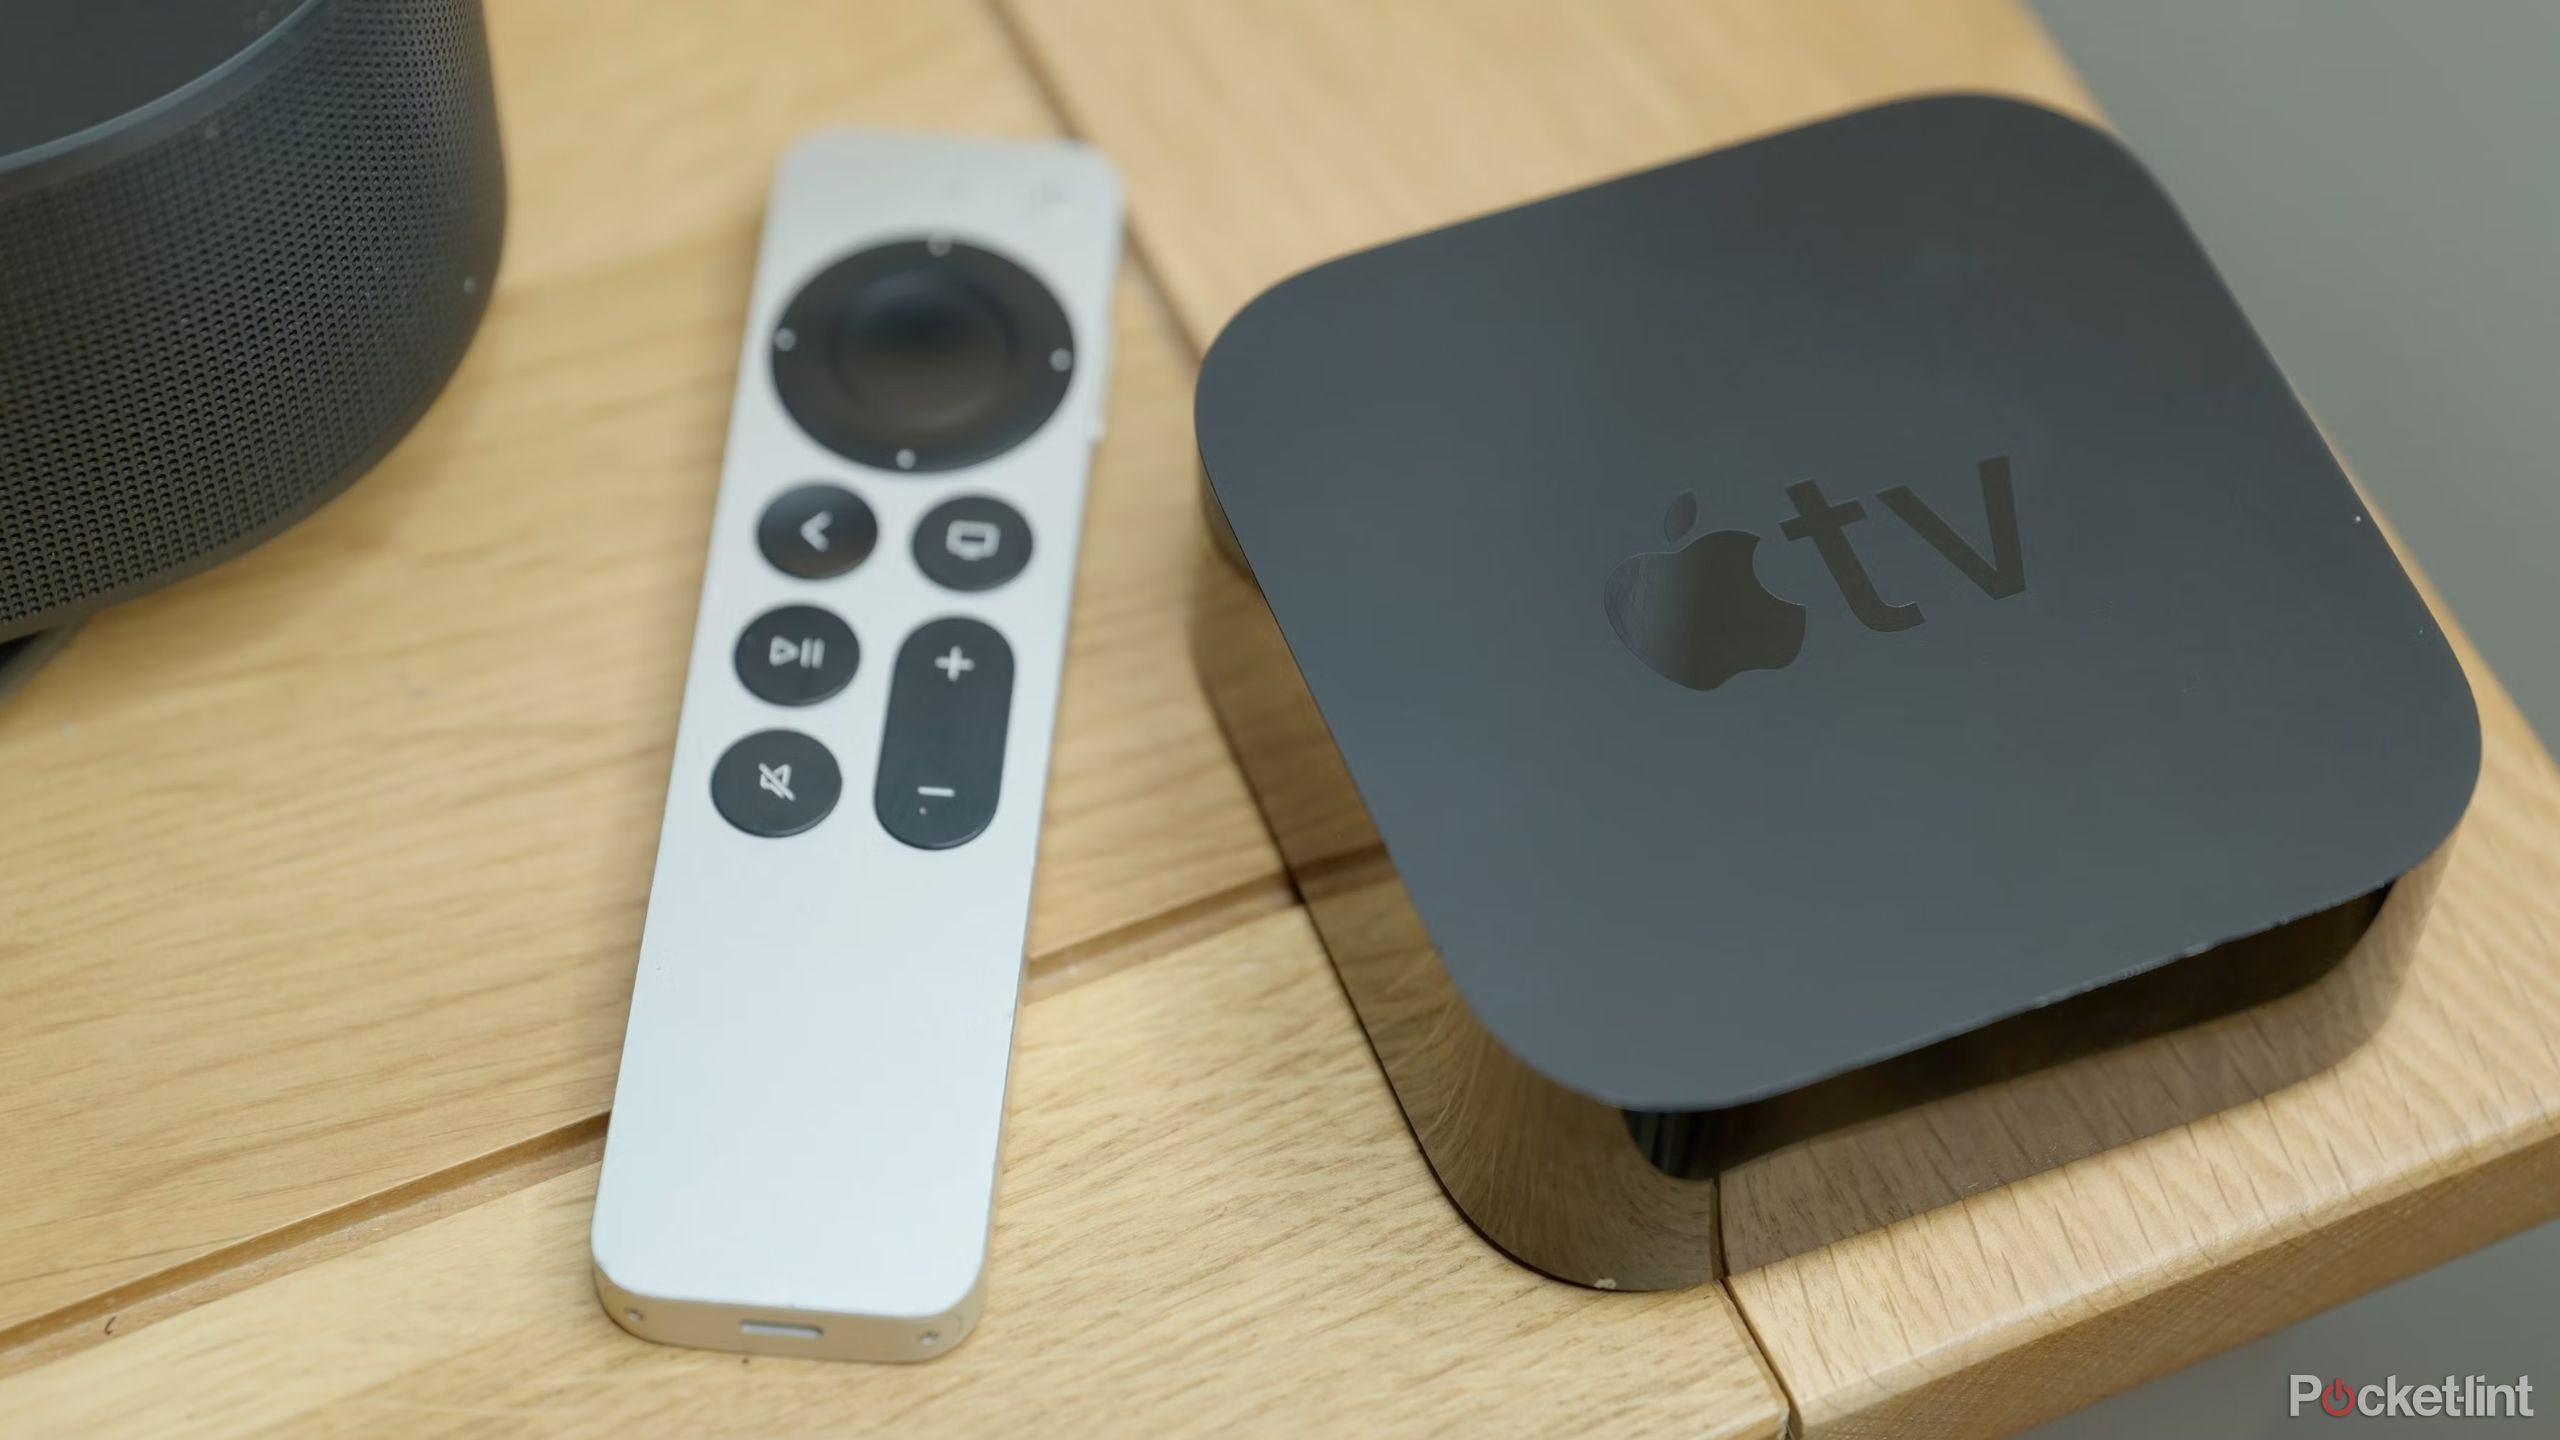 The next Apple TV might arrive with a camera and gesture controls